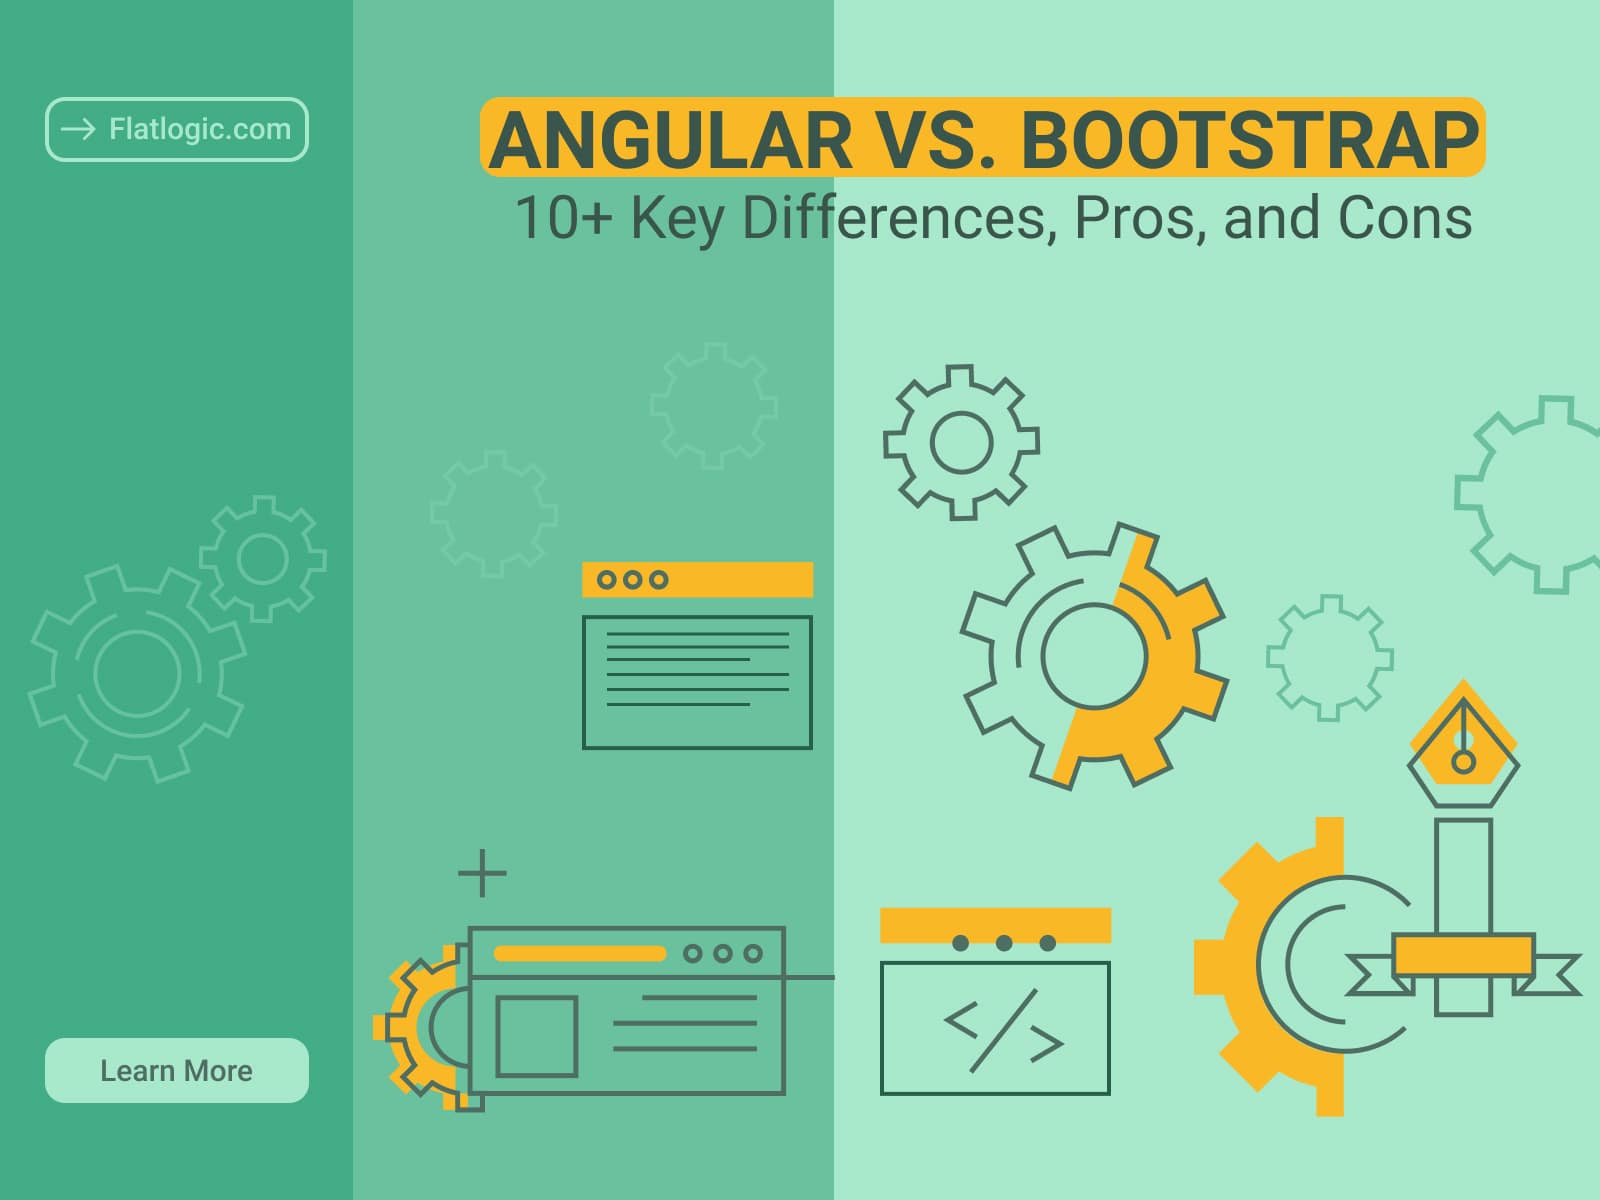 Angular vs. Bootstrap – 6+ Key Differences, Pros, and Cons